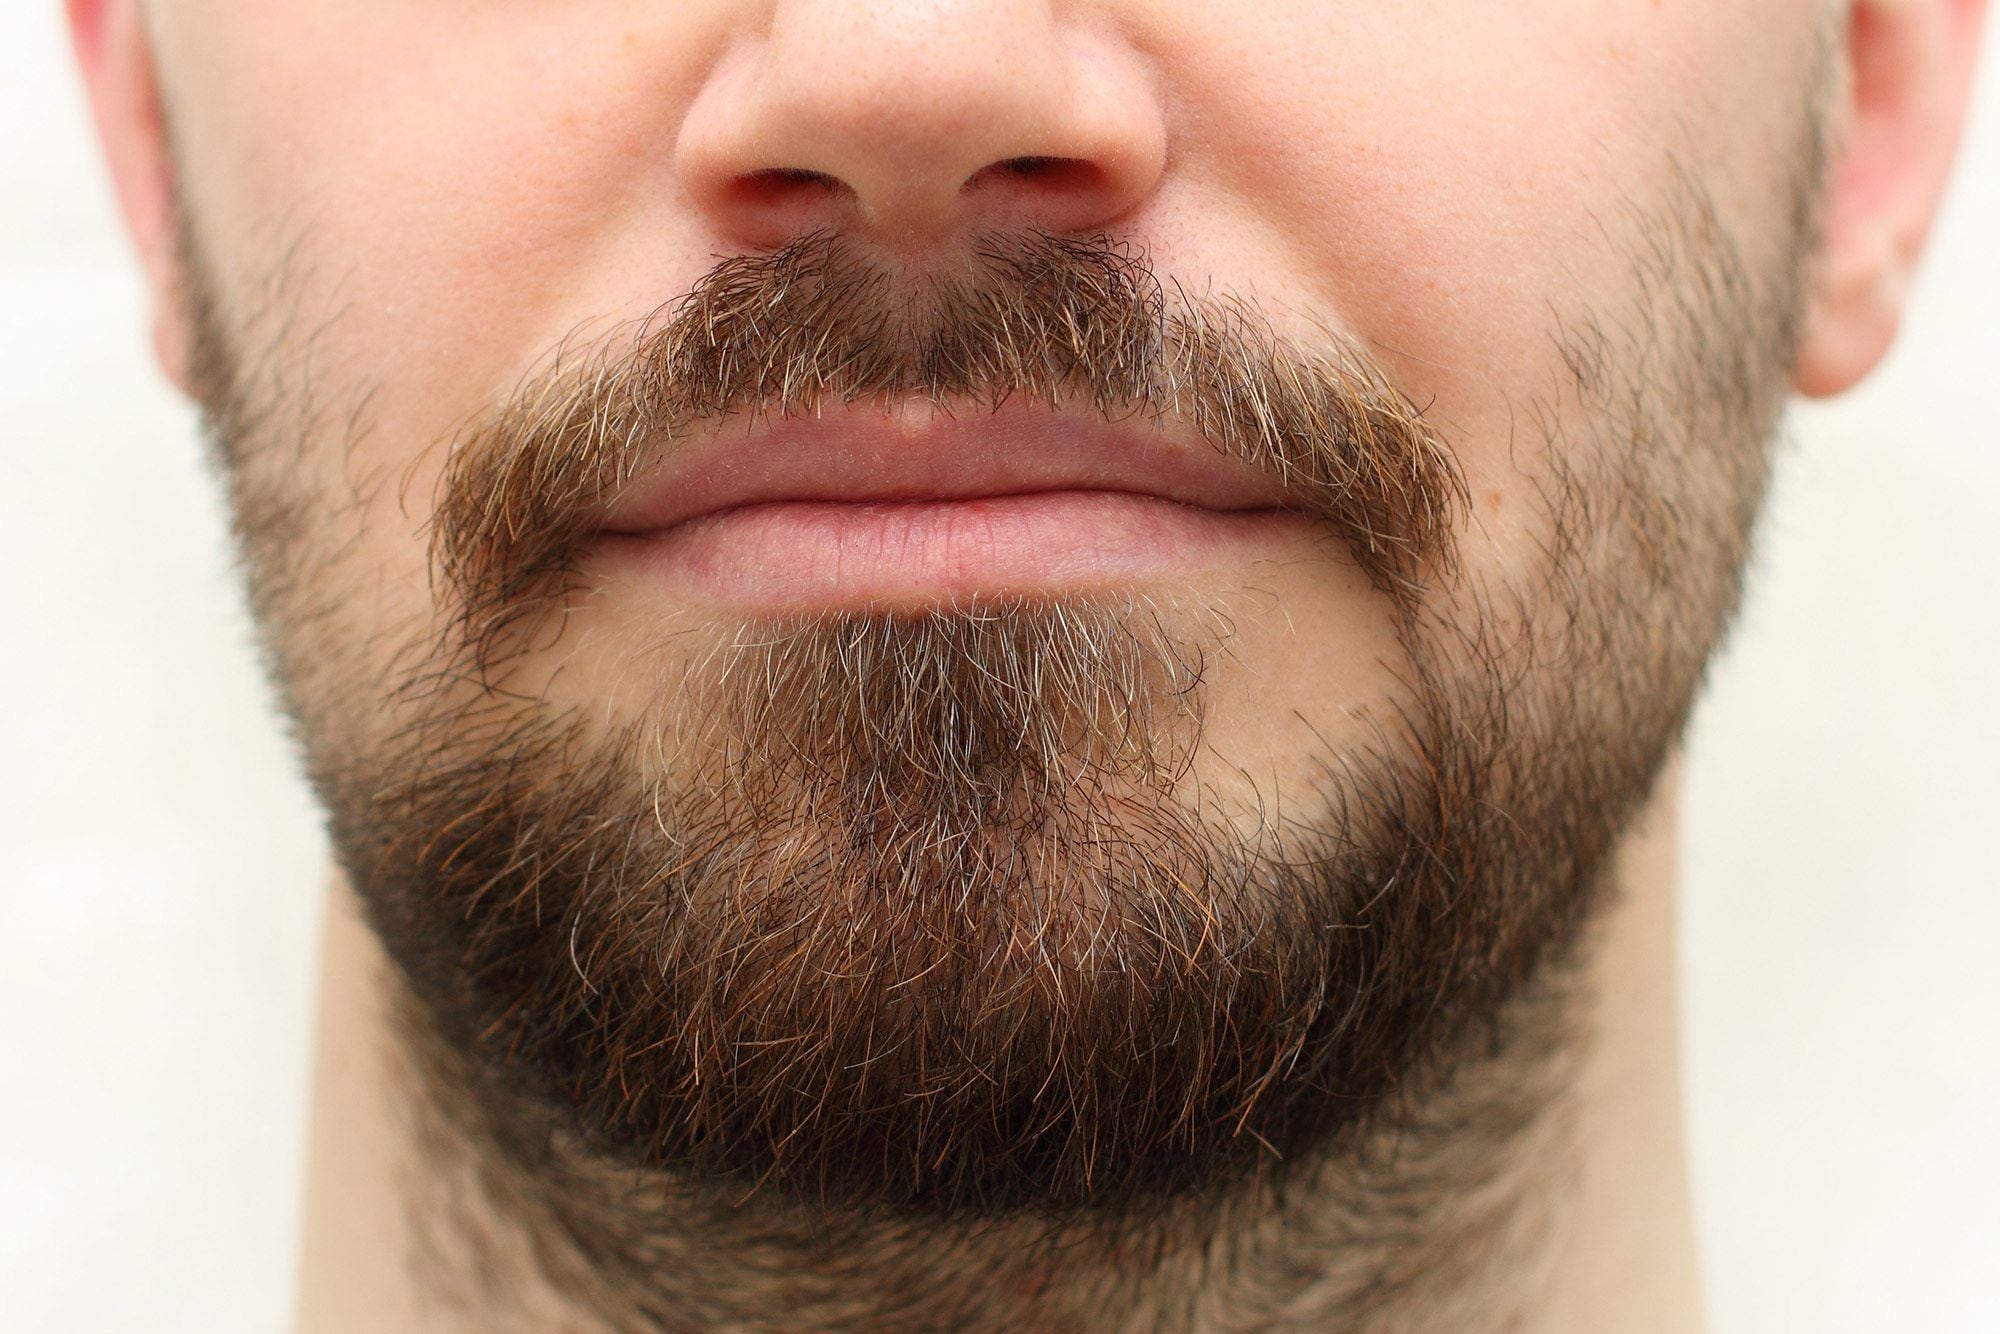 NHS staff told to shave off beards over coronavirus fears as facial hair  can render masks ineffective – The Sun